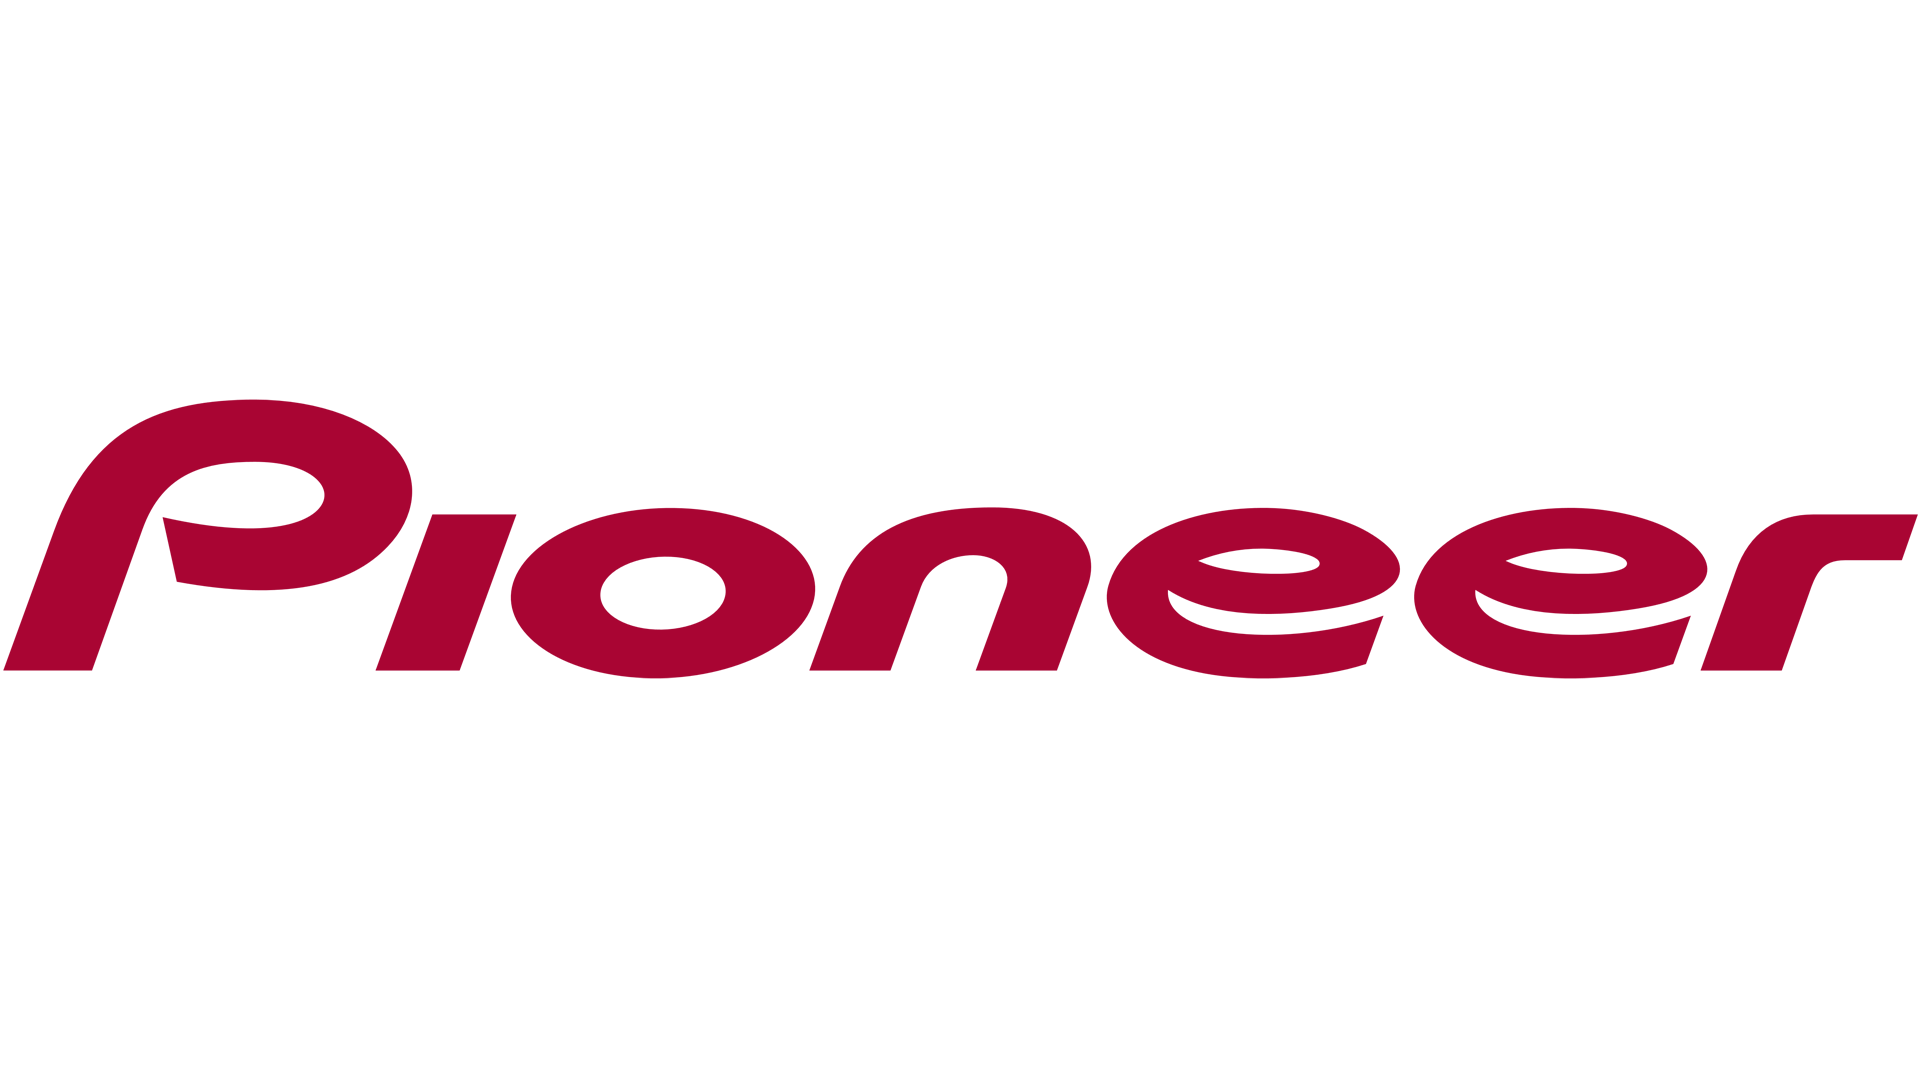 Red Pioneer Logo - Pioneer Logo, Pioneer Symbol, Meaning, History and Evolution